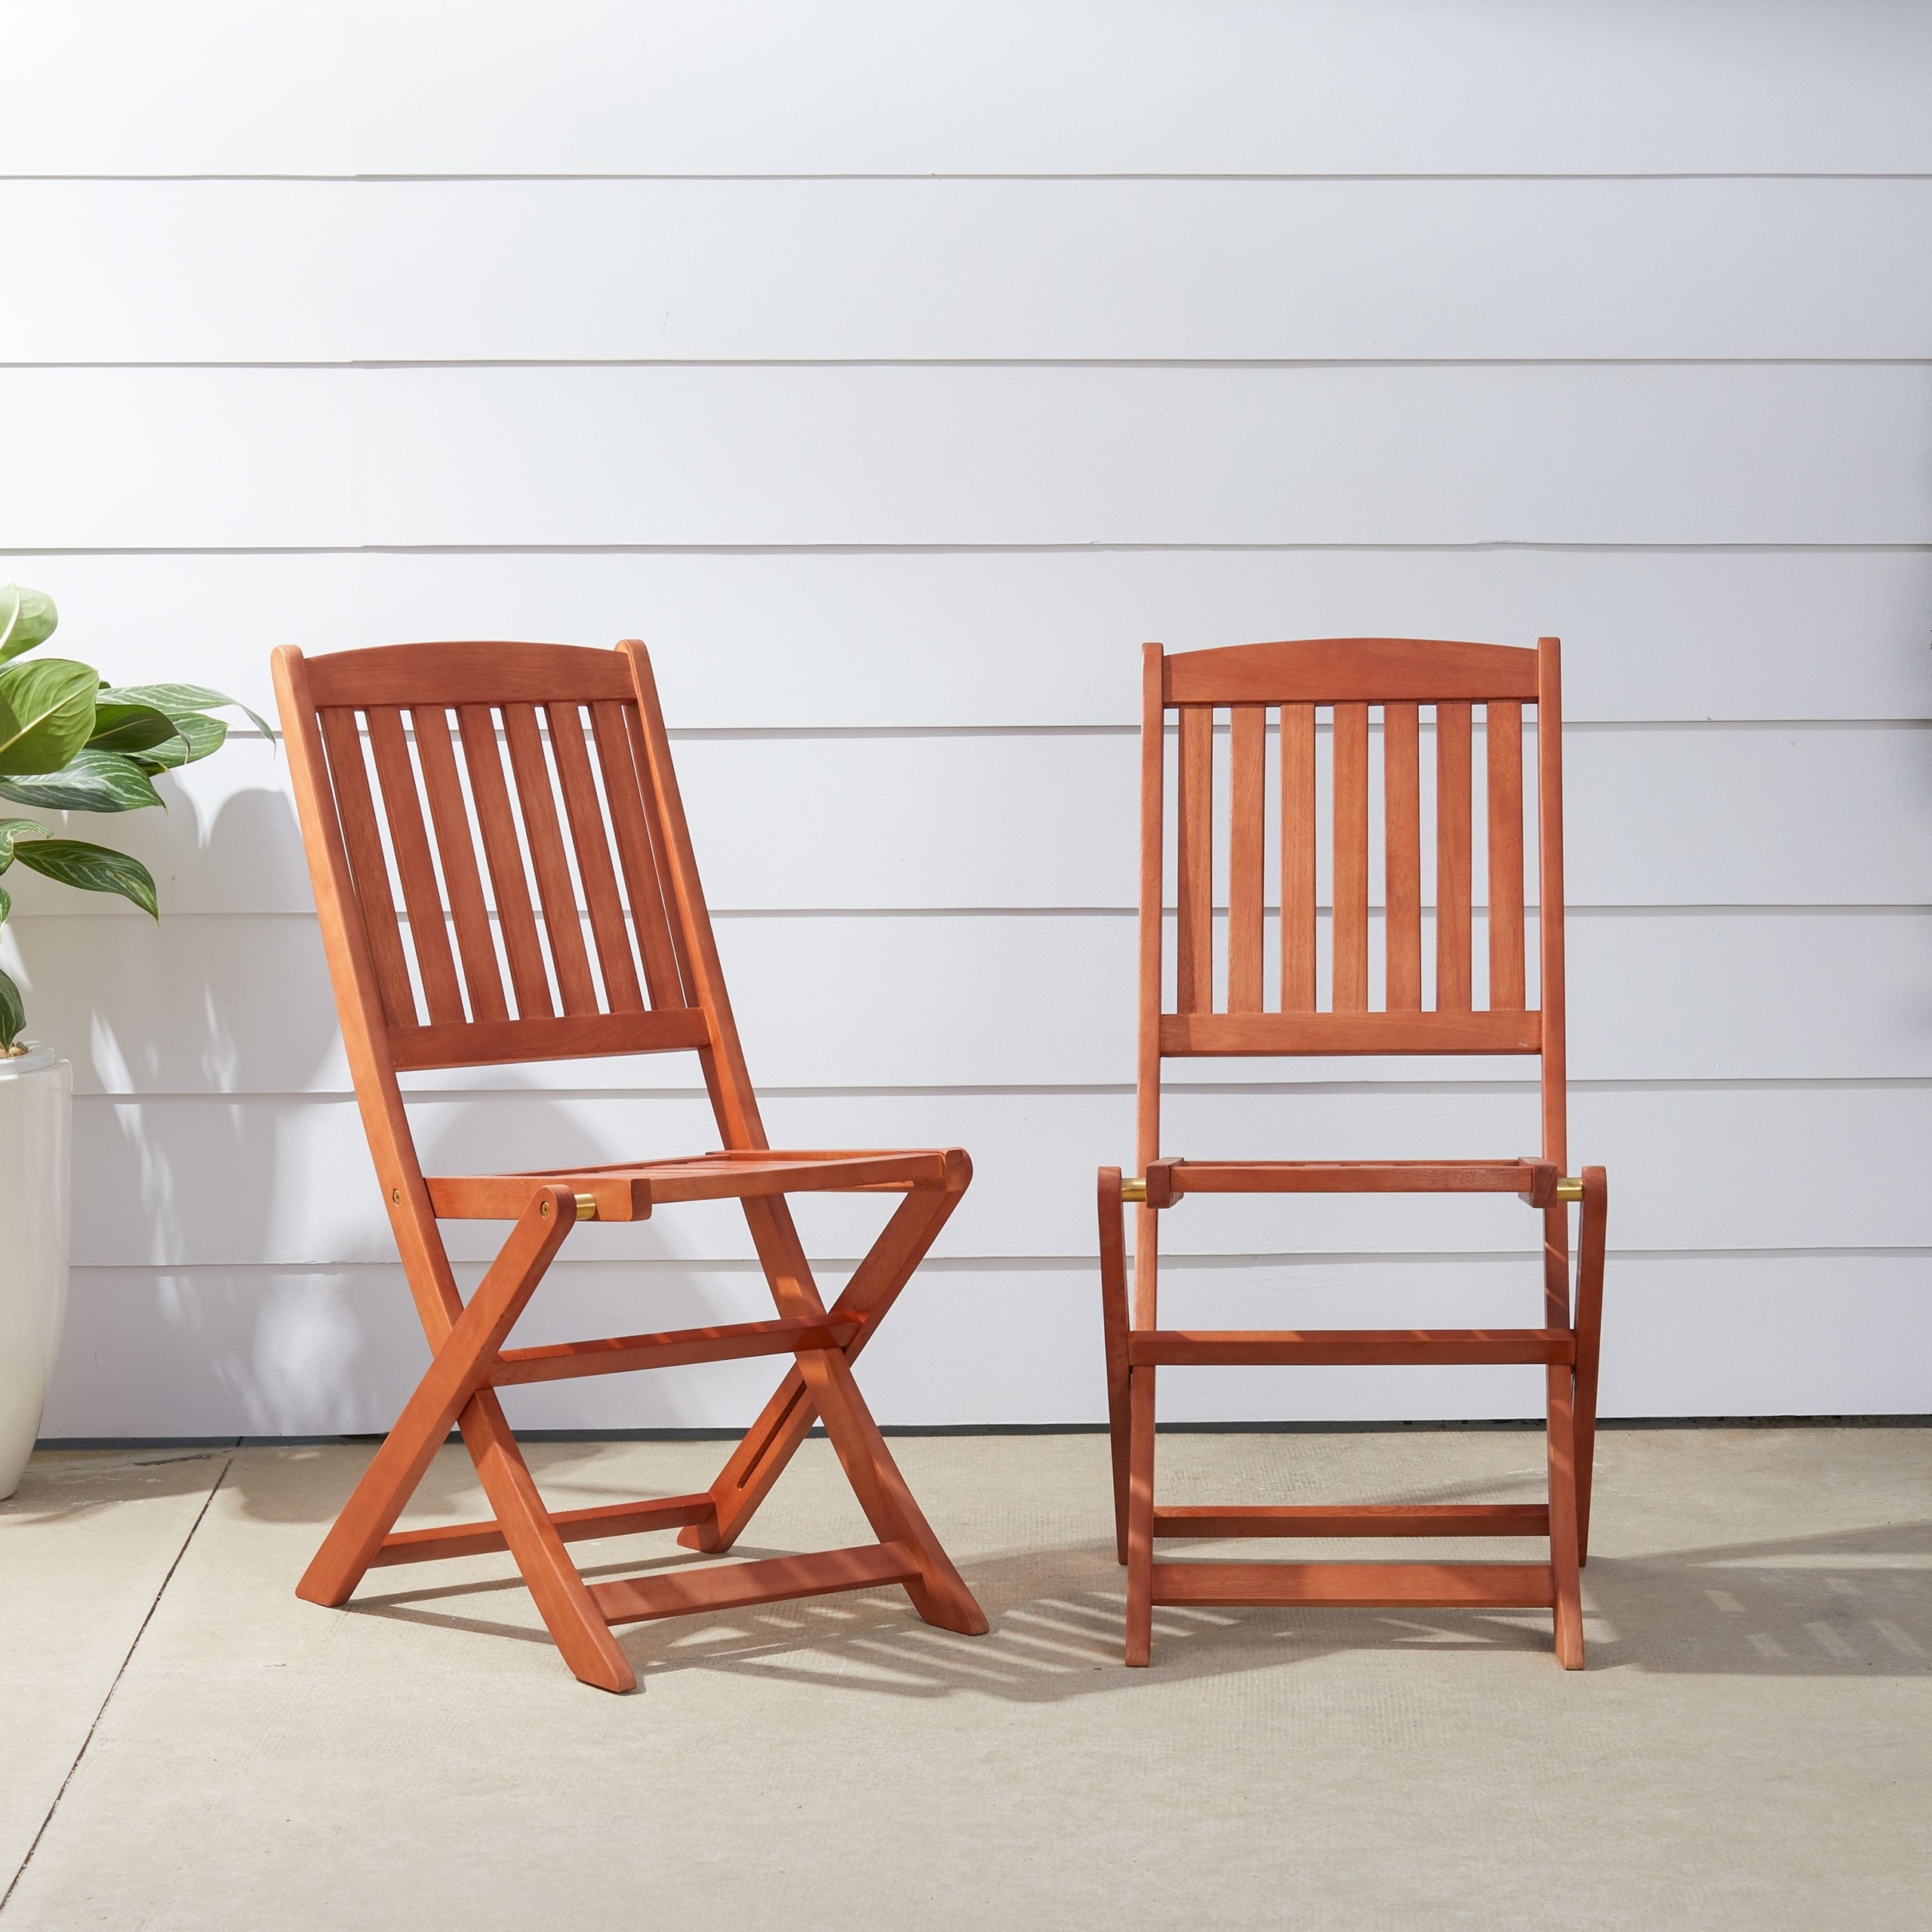 Vifah outdoor wood folding bistro chairs set of 2